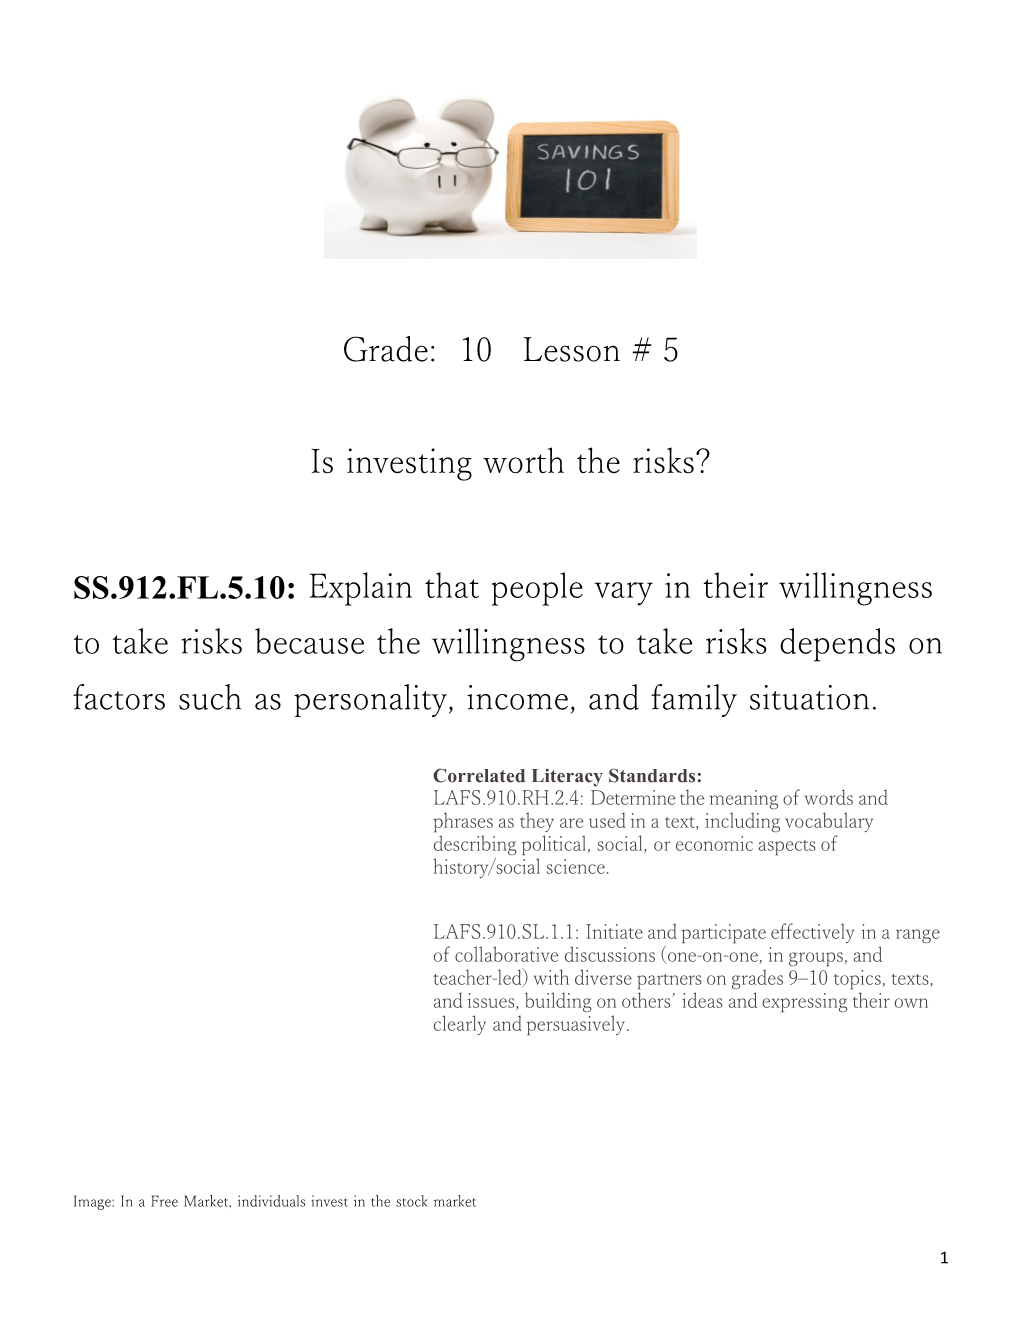 Is Investing Worth the Risks?